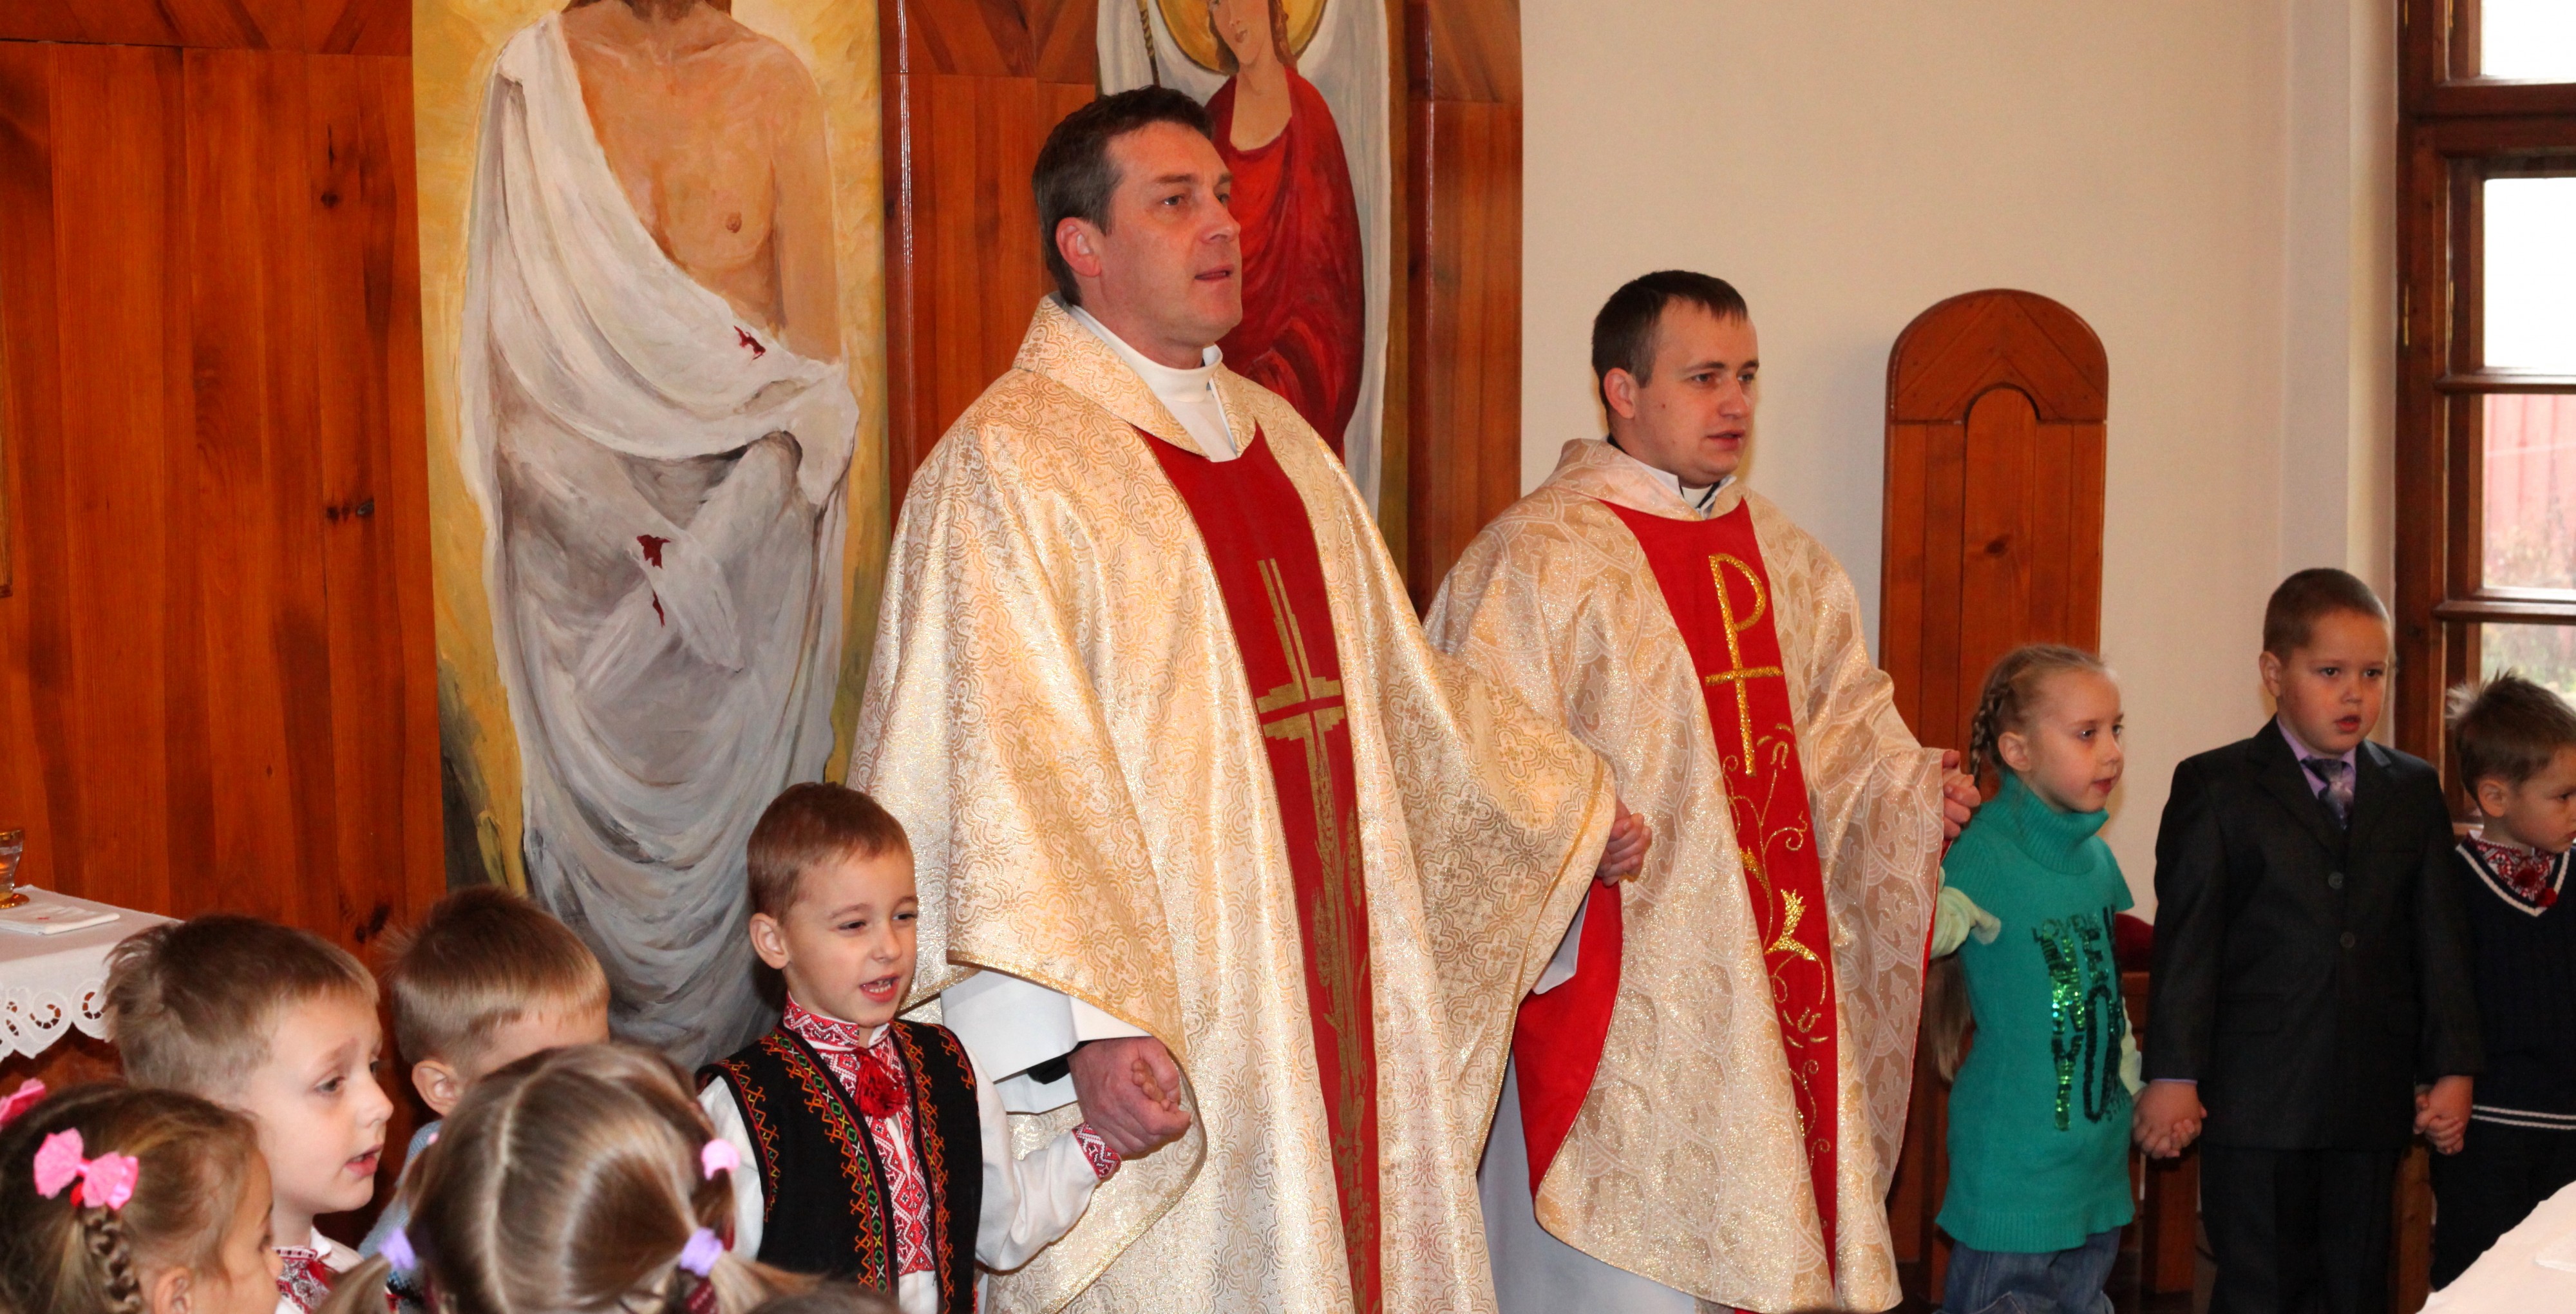 kids praying with priests at a Holy Mass in a Catholic Church